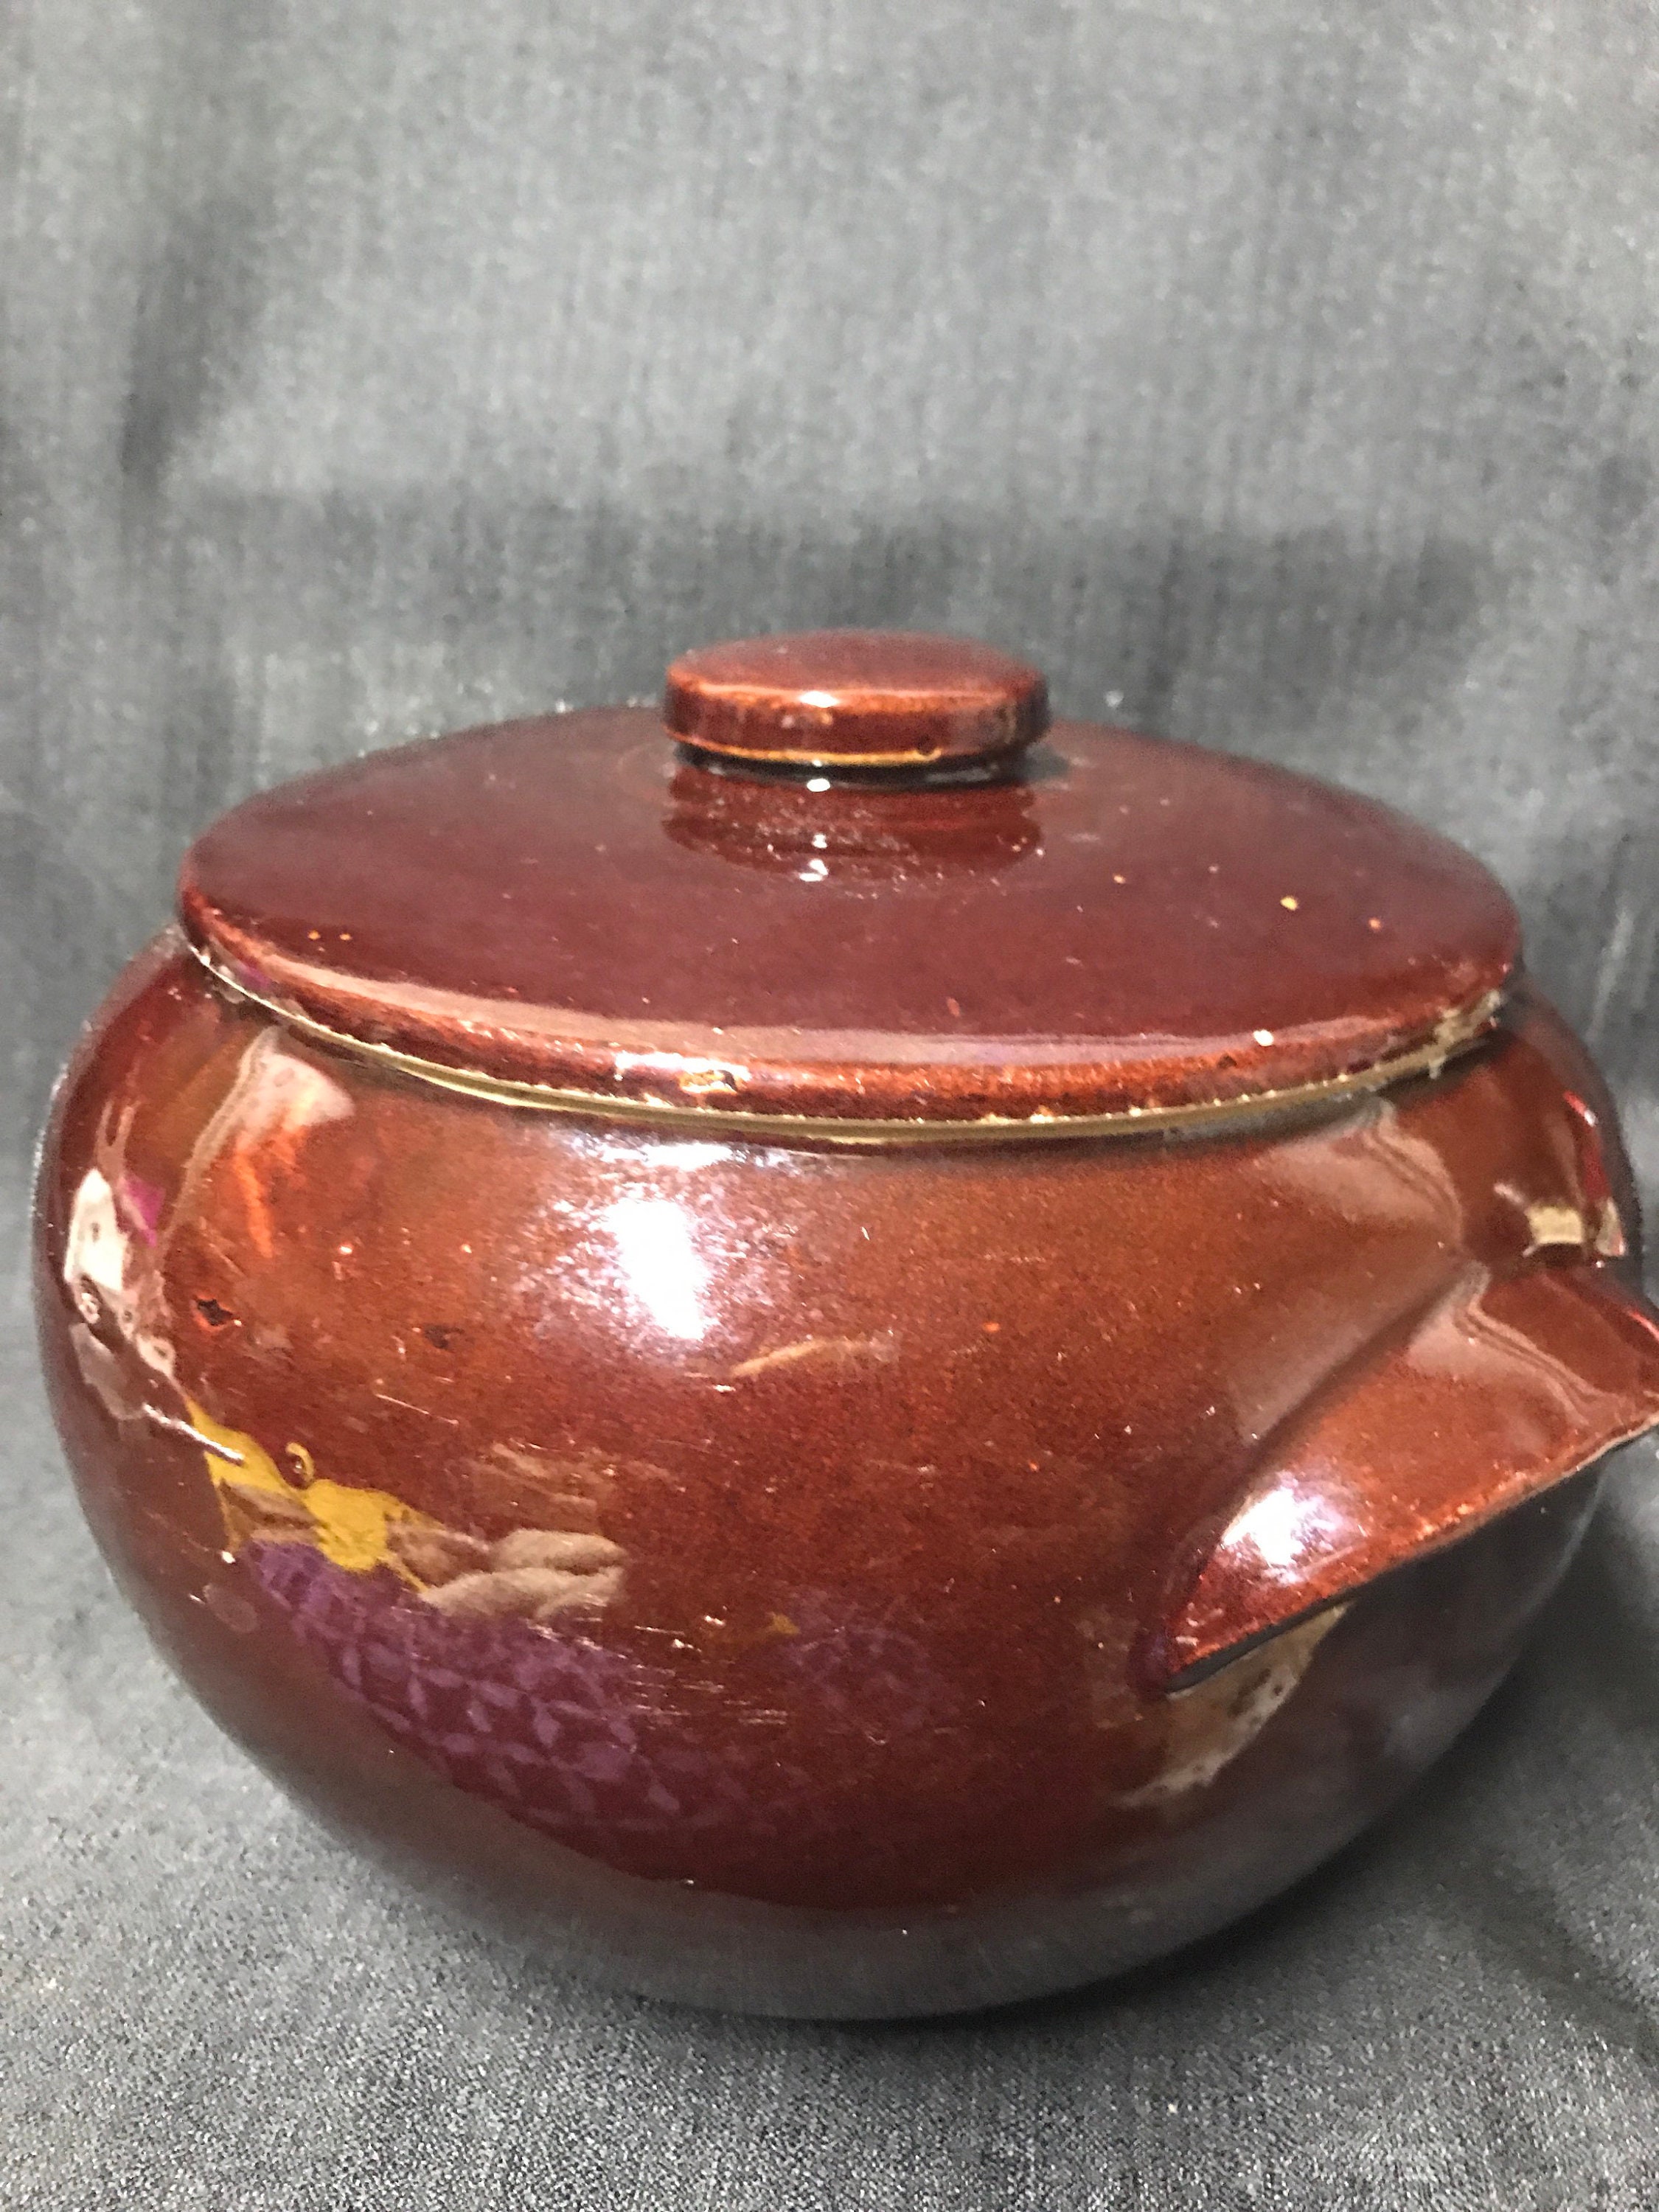 Antique American Stoneware 2 Quart Size Bean Pot - Baked Beans Cooking Pot  Circa Early 20th Century